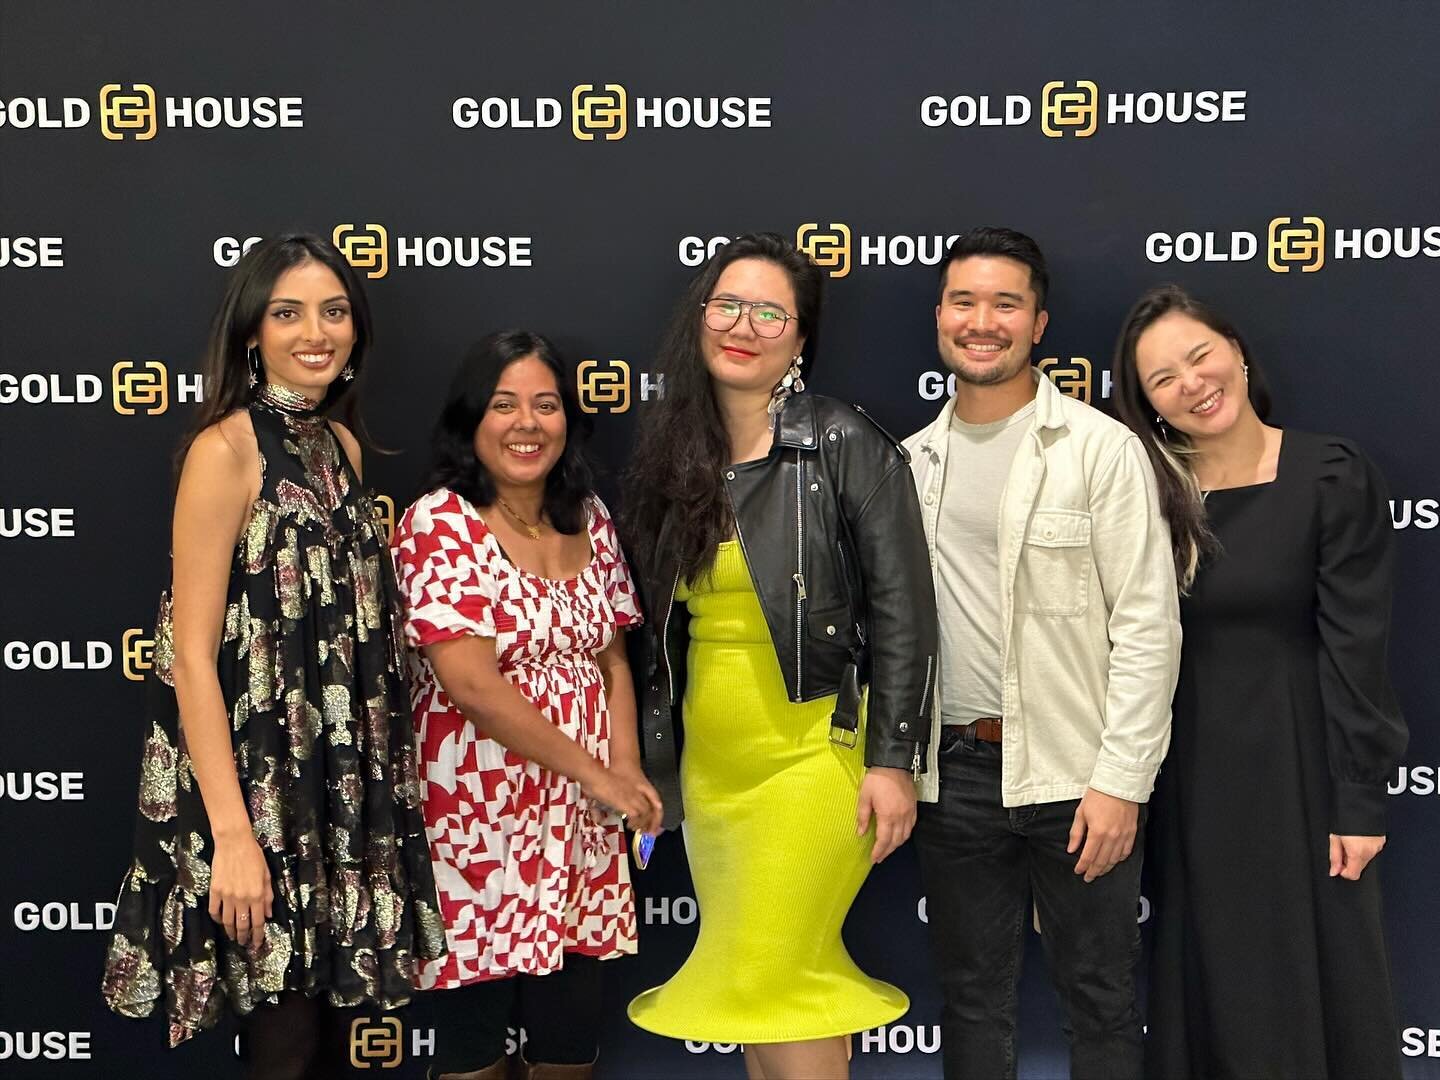 Eid Mubarak had a very special screening recently at @wme for our Oscar campaign, along with the short films Yokelan 66 and Closing Dynasty, moderated by @zohreen_ 🤩 Thank you @goldhouseco @voguechina @rickshawfilm @define1497 @sawientertainment for